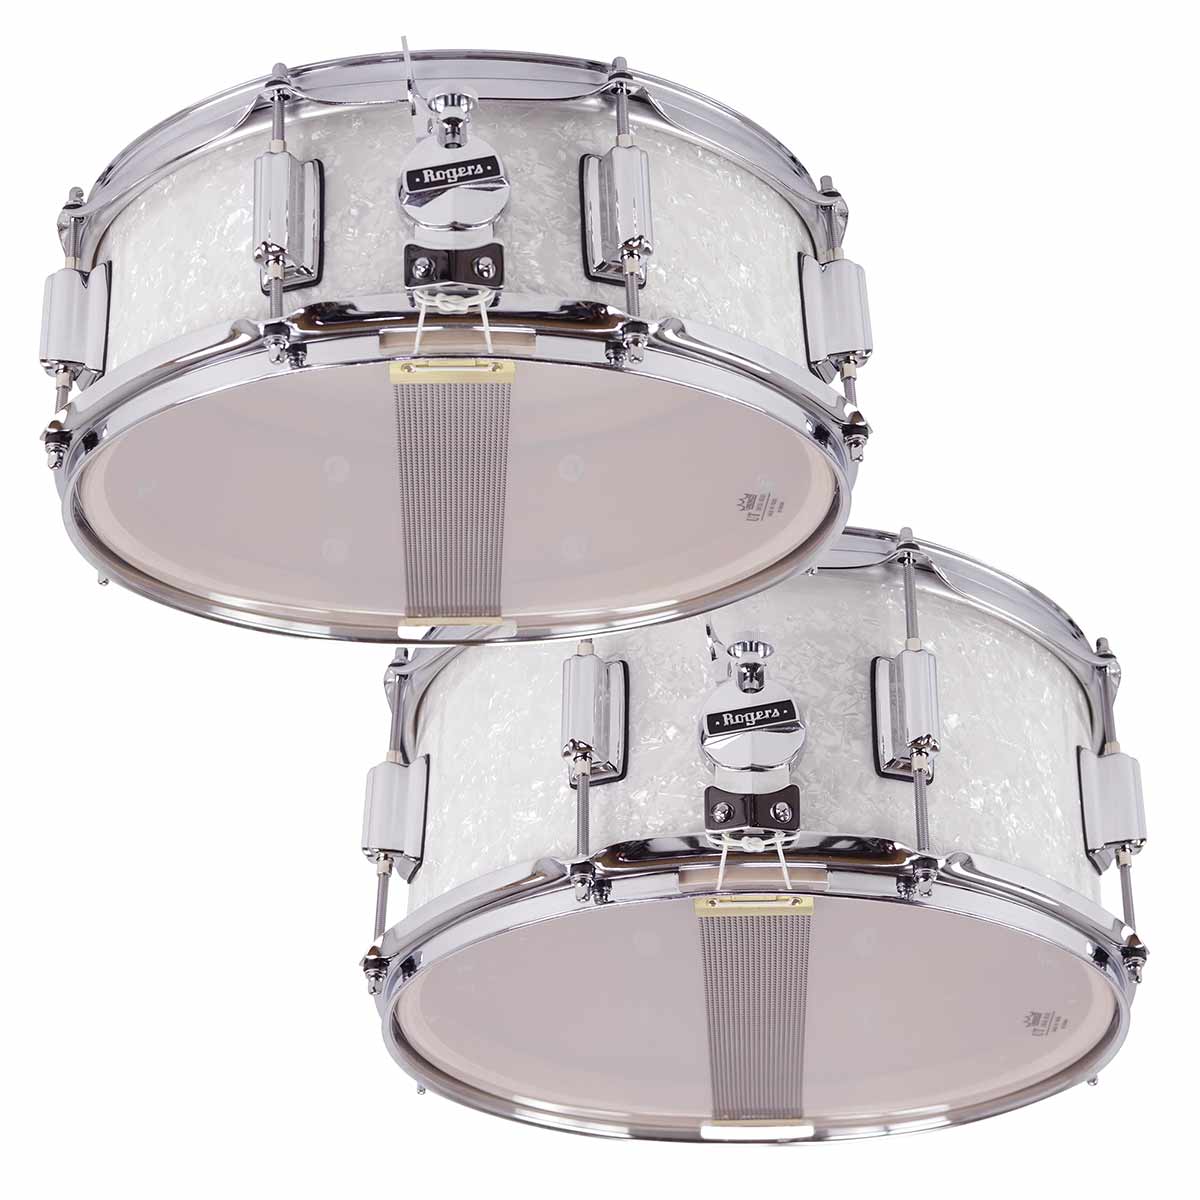 Matching Snare Drums